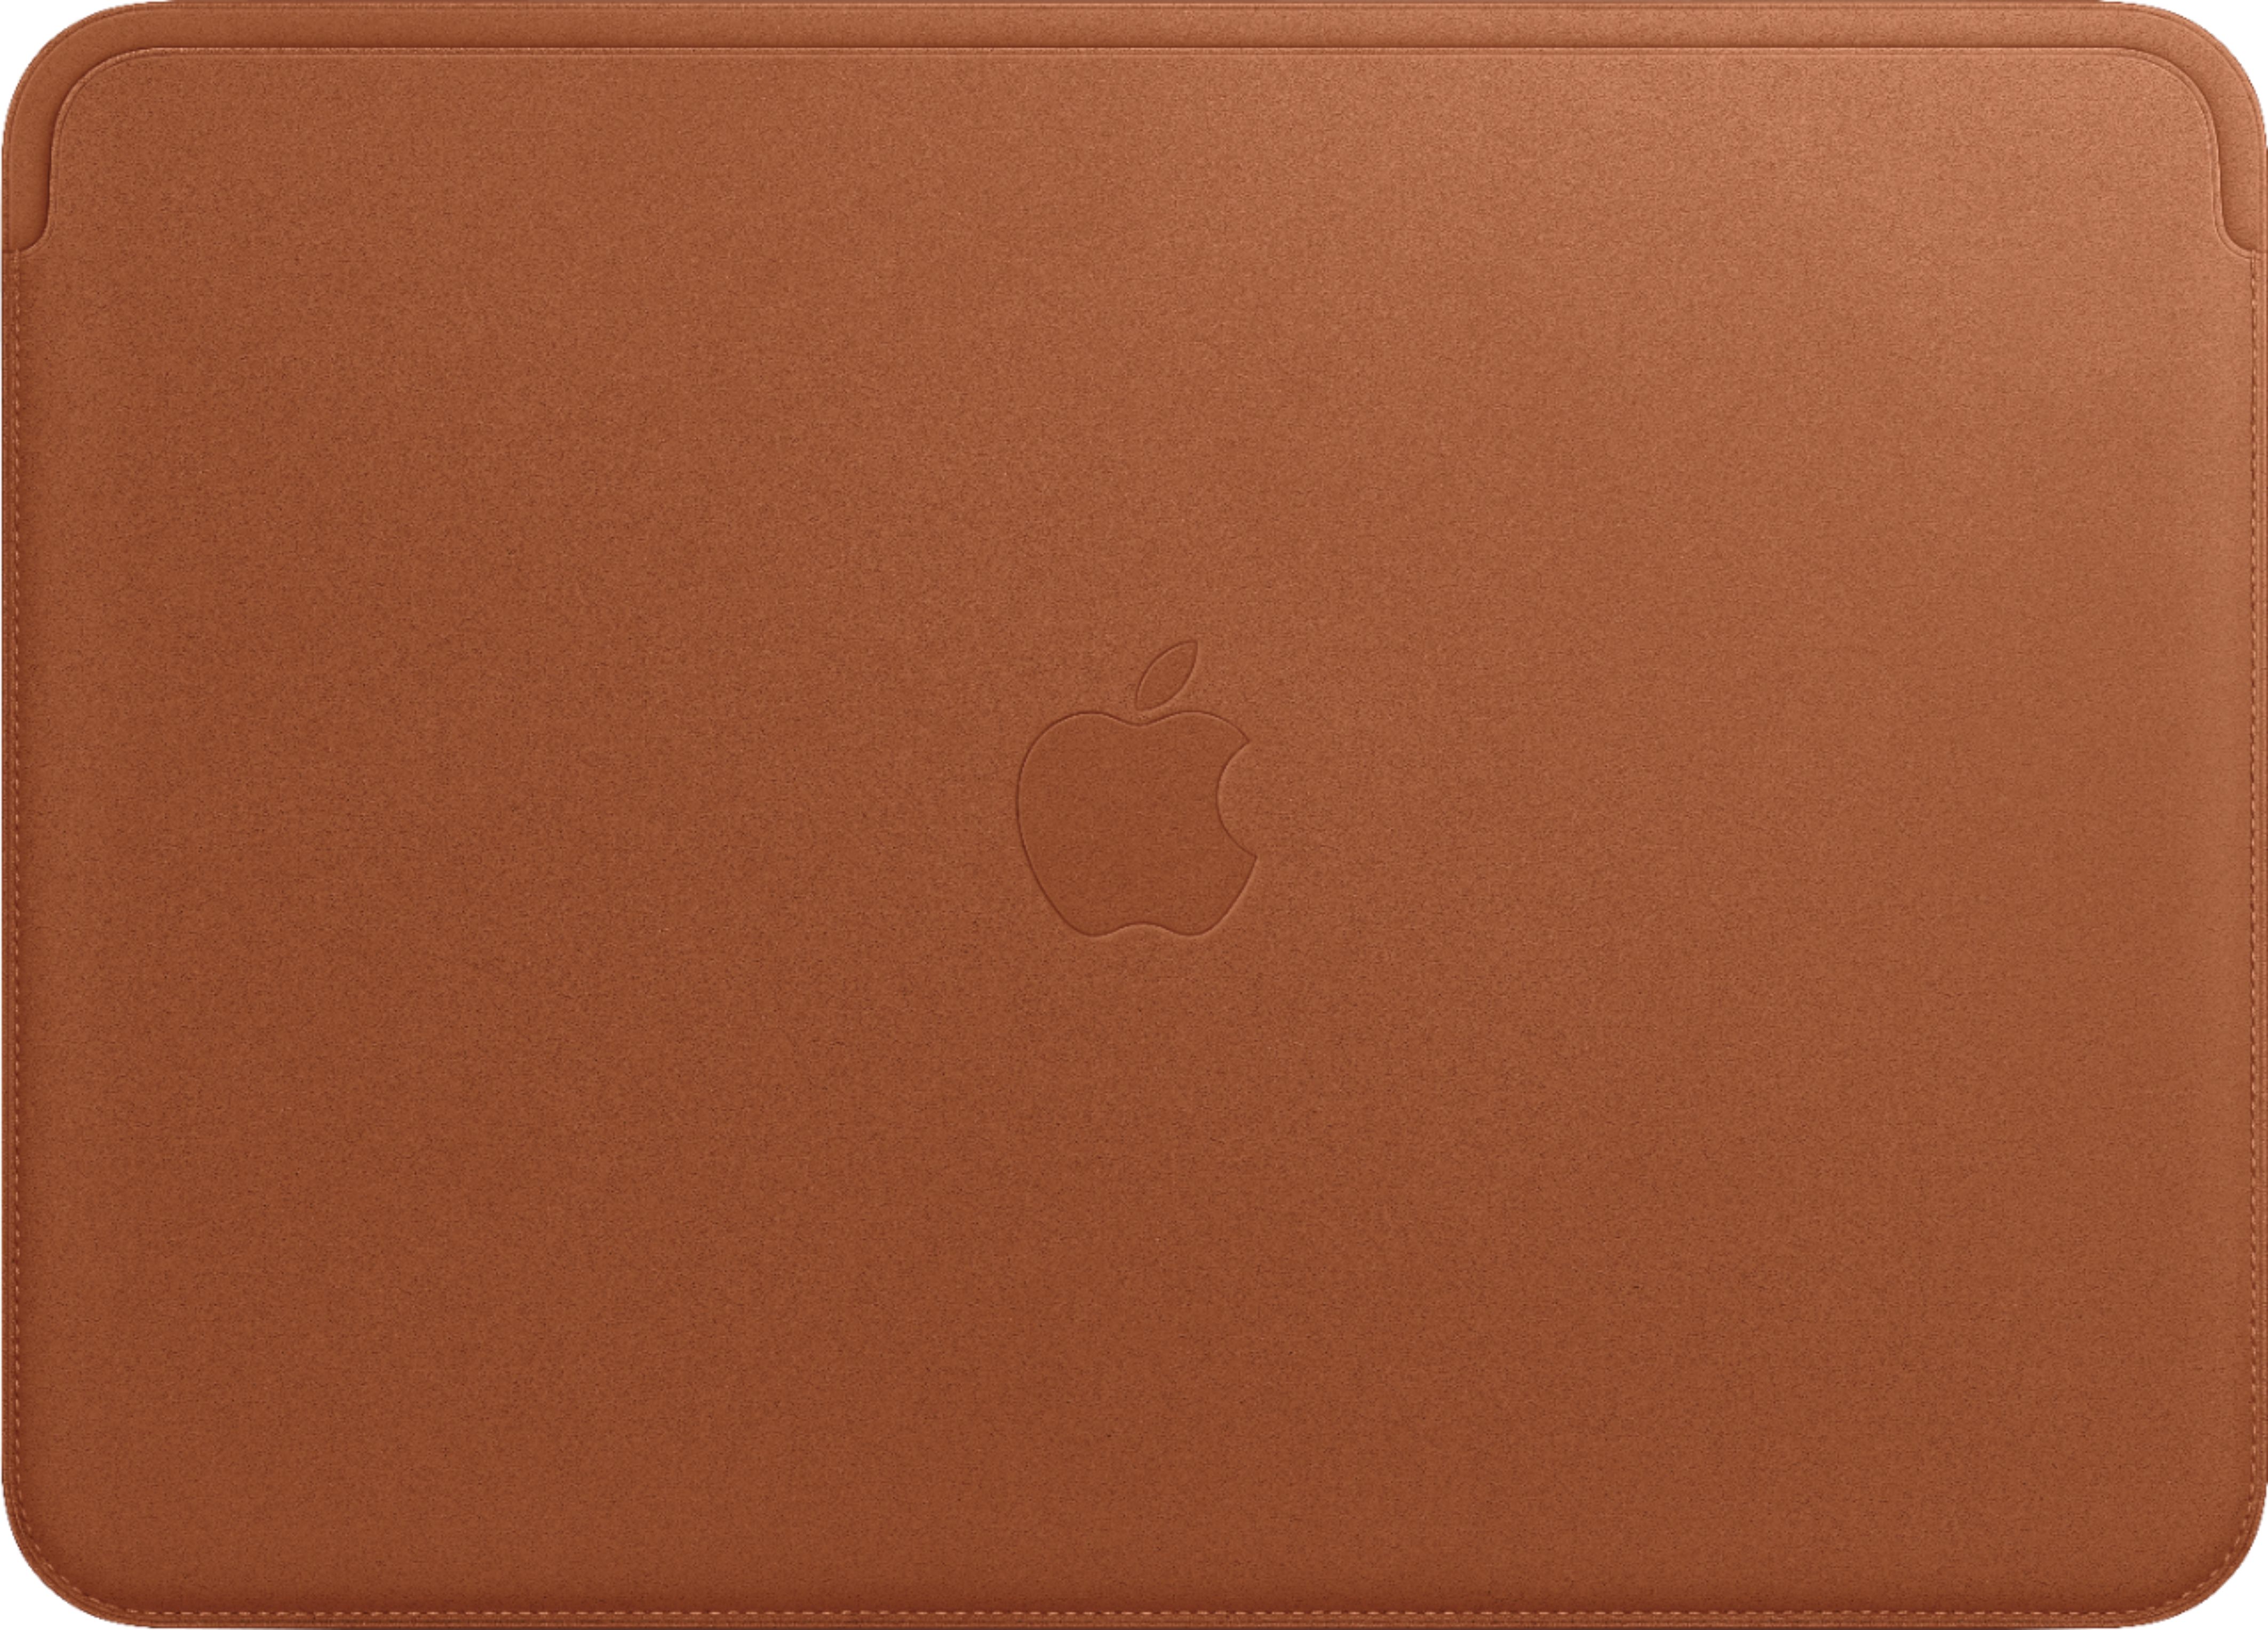 Apple - Leather Sleeve for 15-Inch MacBook - Saddle Brown